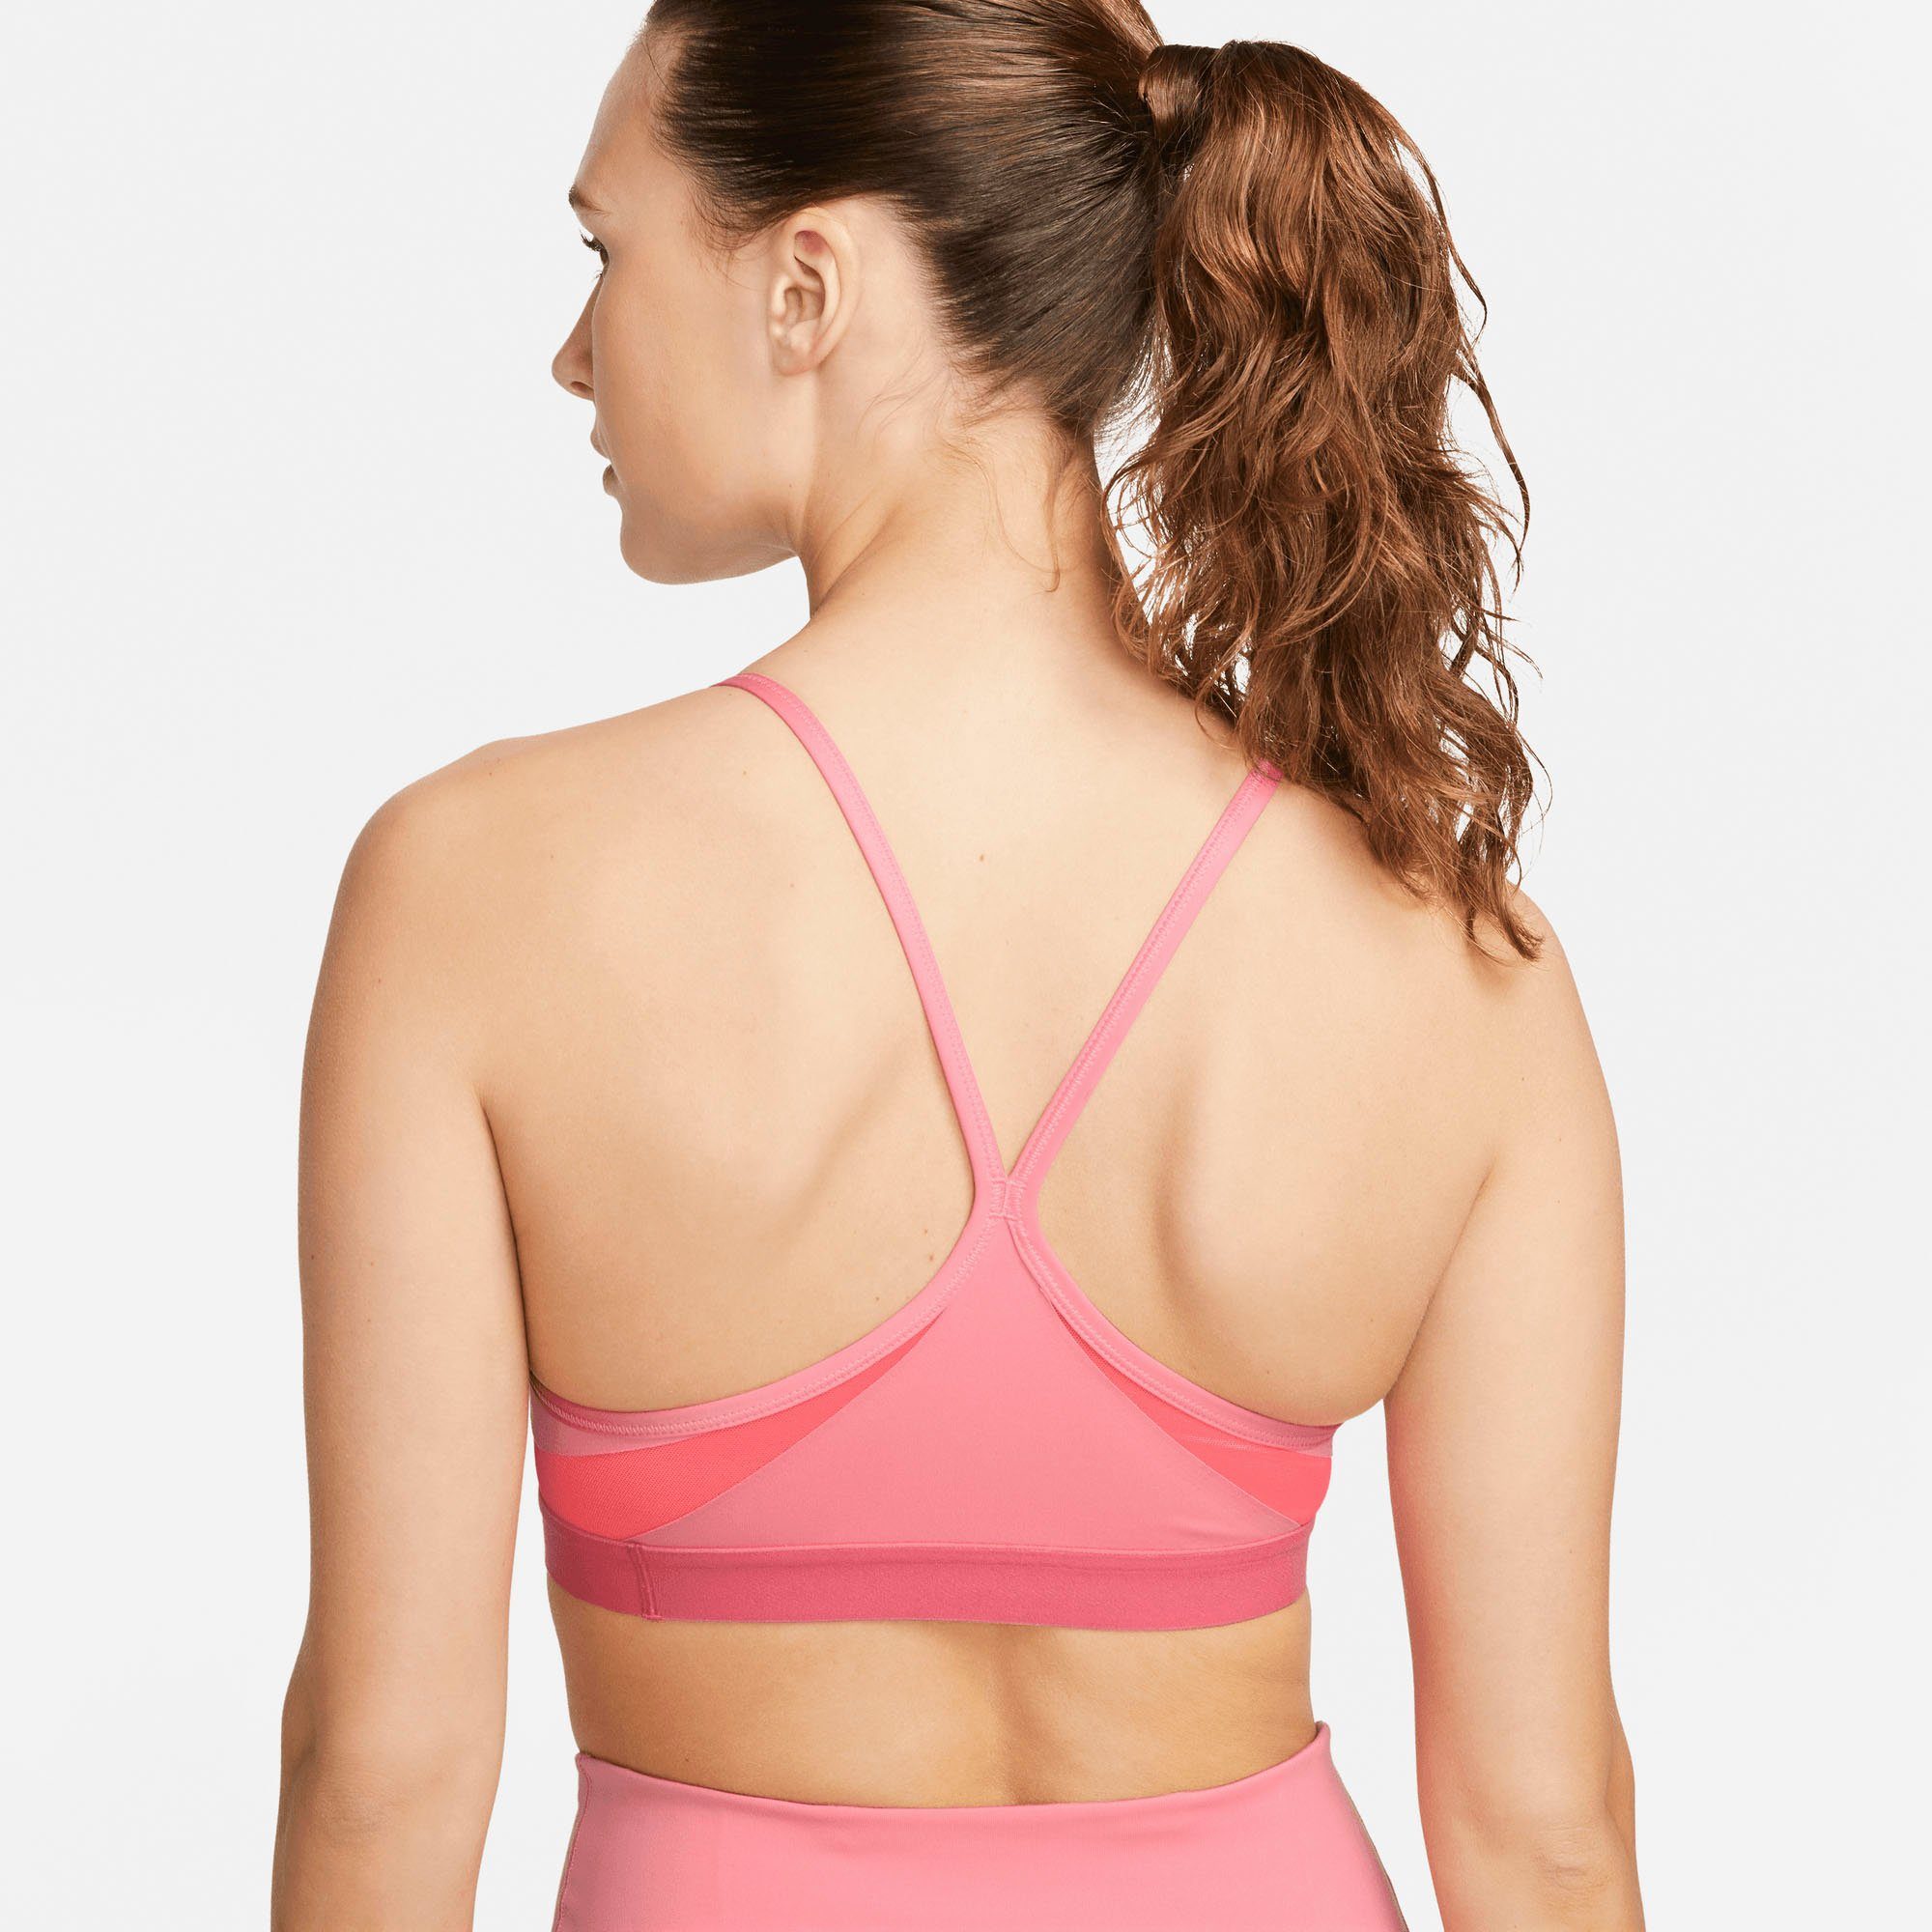 Sport-BH INDY BRA Nike SPORTS CORAL/WHITE PADDED WOMEN'S V-NECK PUNCH/SEA CHALK/HOT CORAL LIGHT-SUPPORT